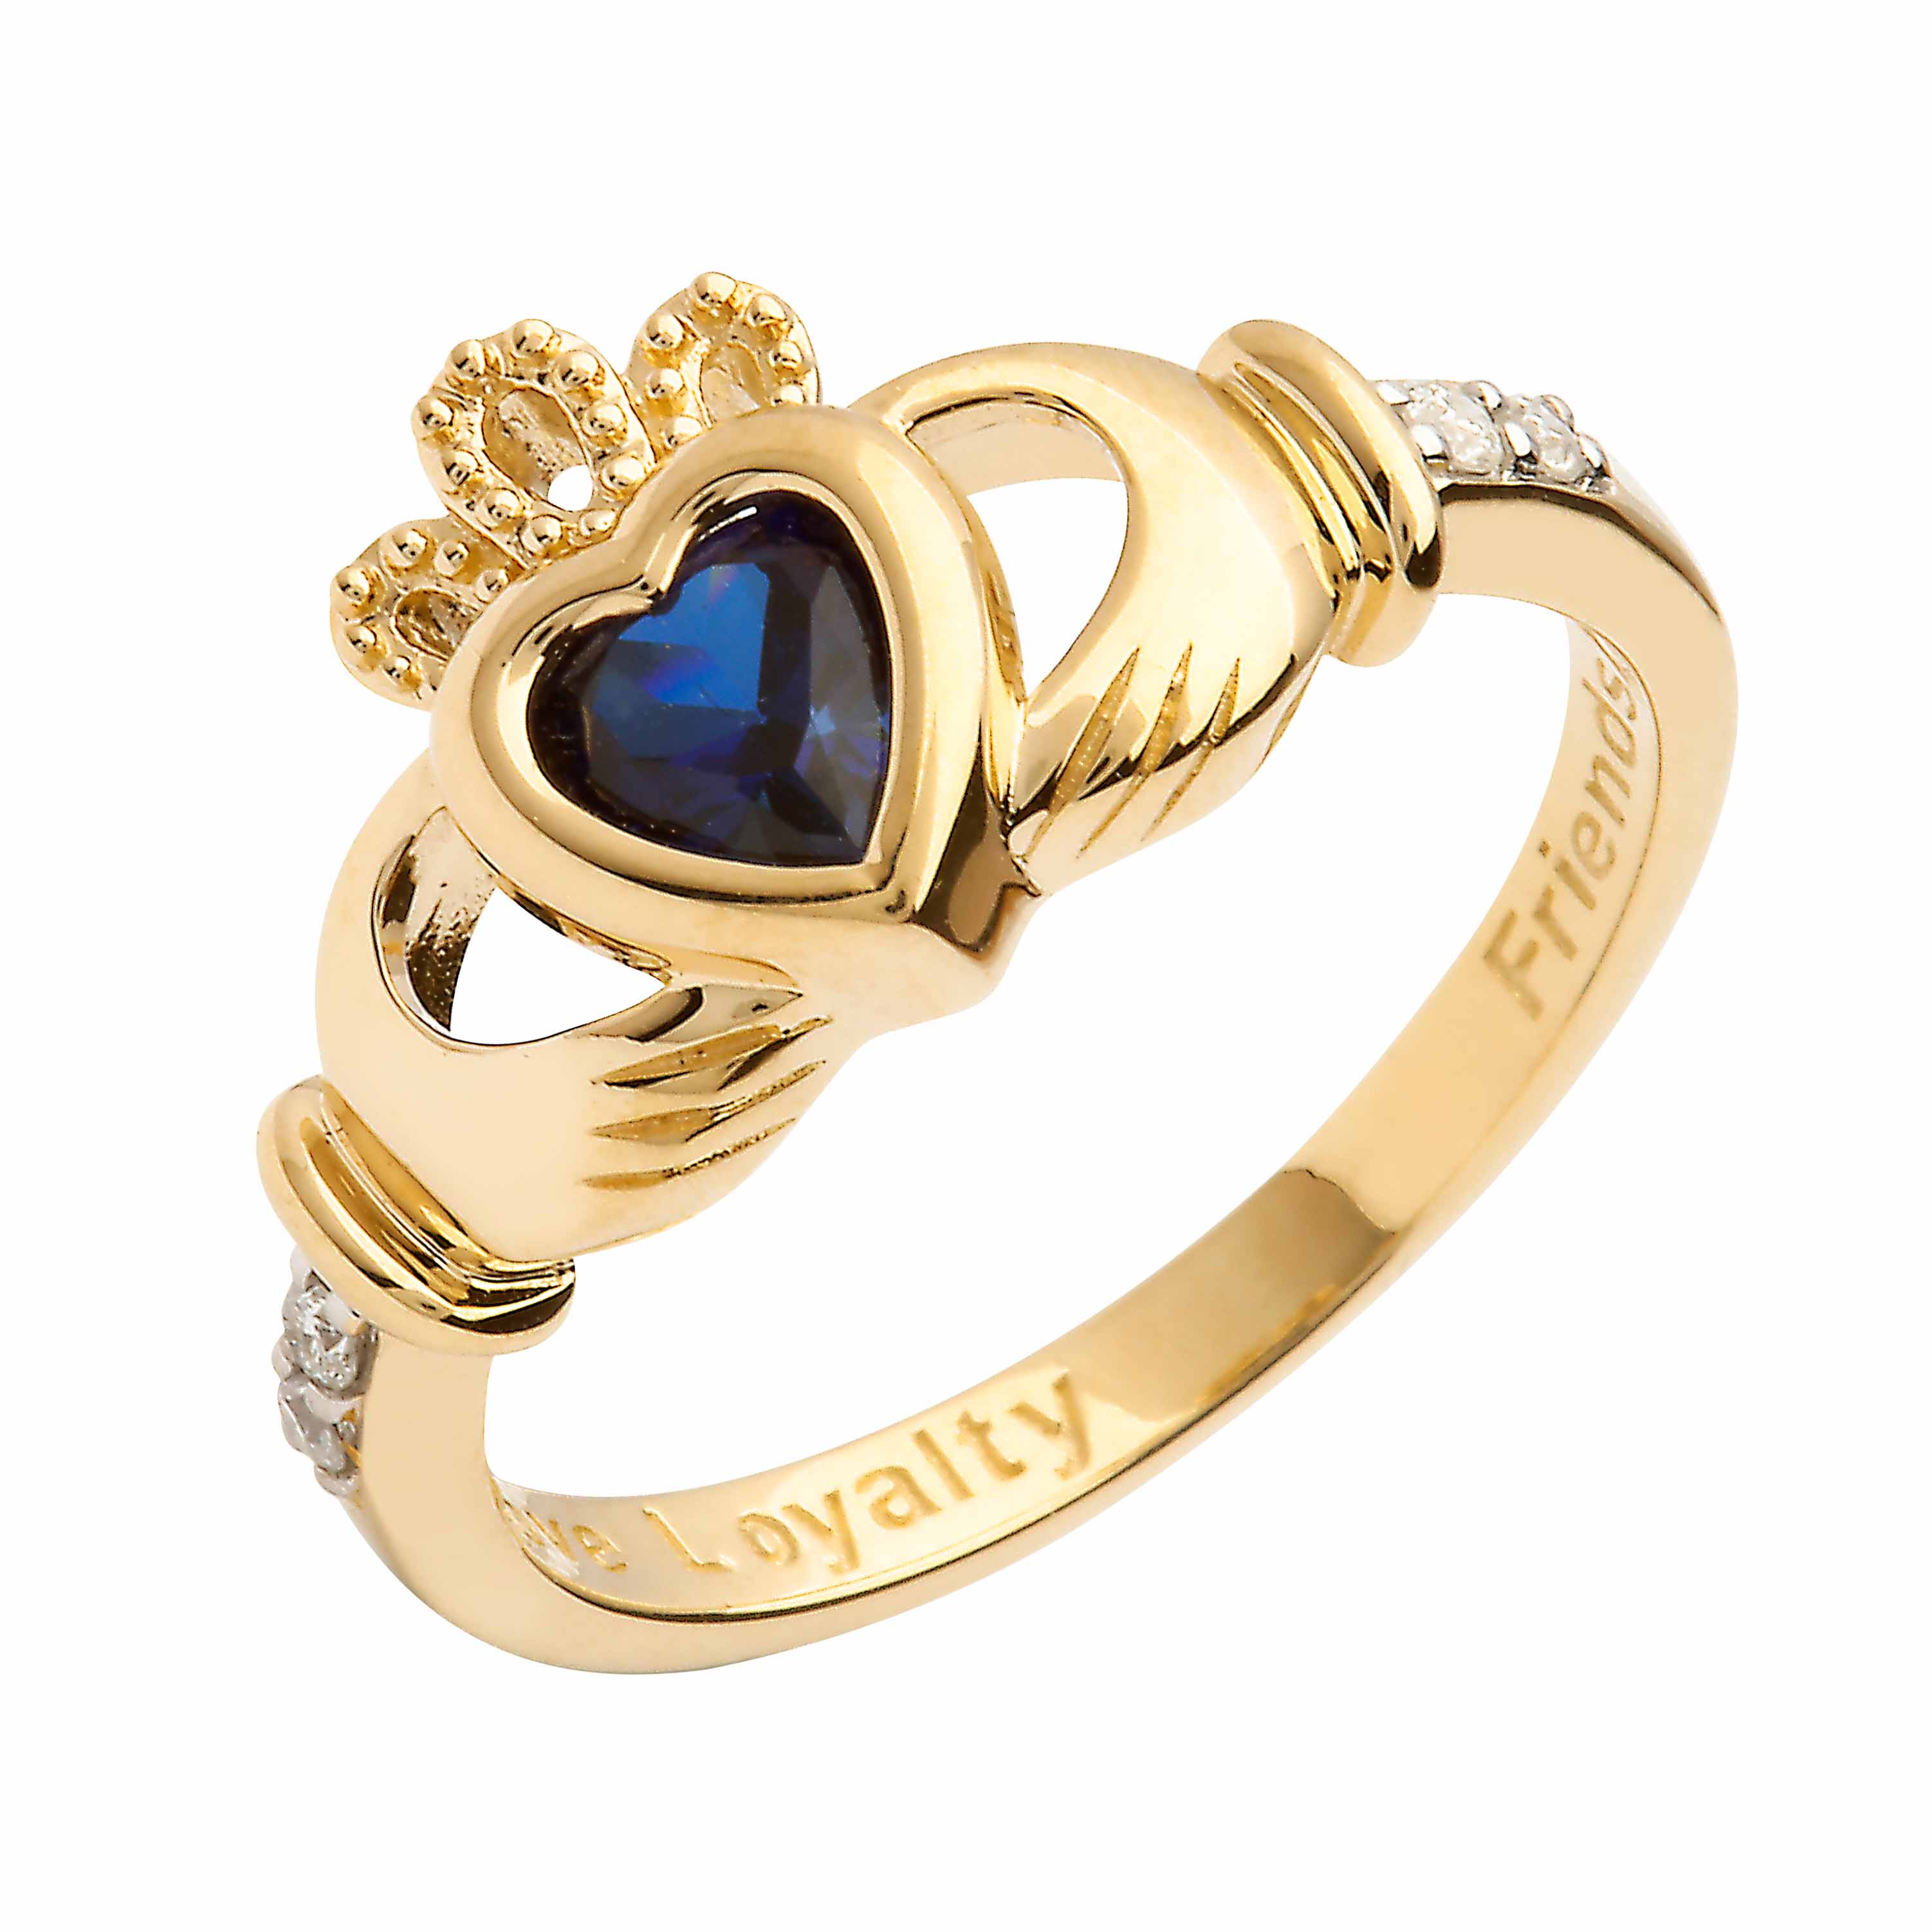 Details about   1.55 ct Heart Irish Celtic Claddagh Sky Blue Topaz Promise Ring 14k Yellow Gold 